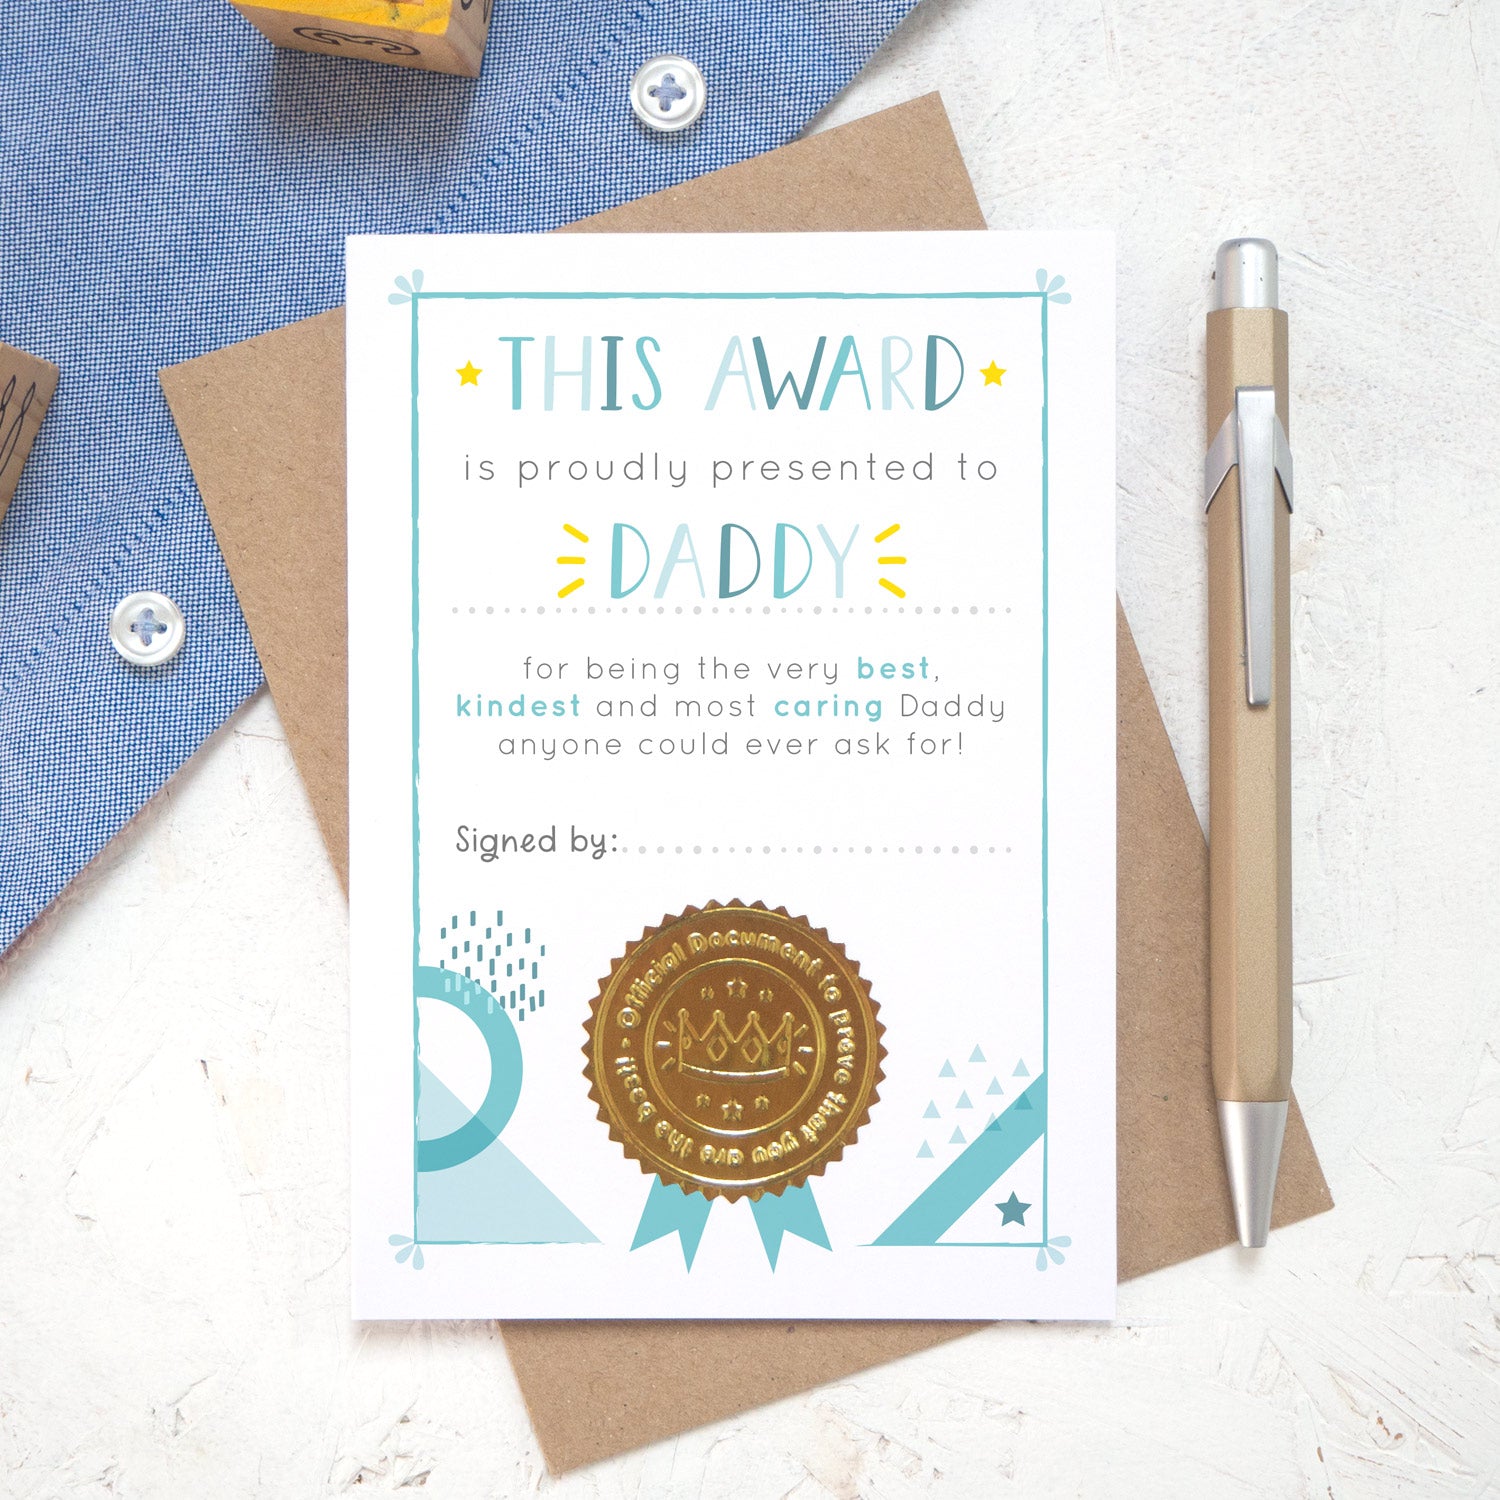 A best daddy certificate card featuring text in varying tones of blue and pops of yellow. There is also a gold, shiny, seal at the bottom of the award to make it an official certificate!